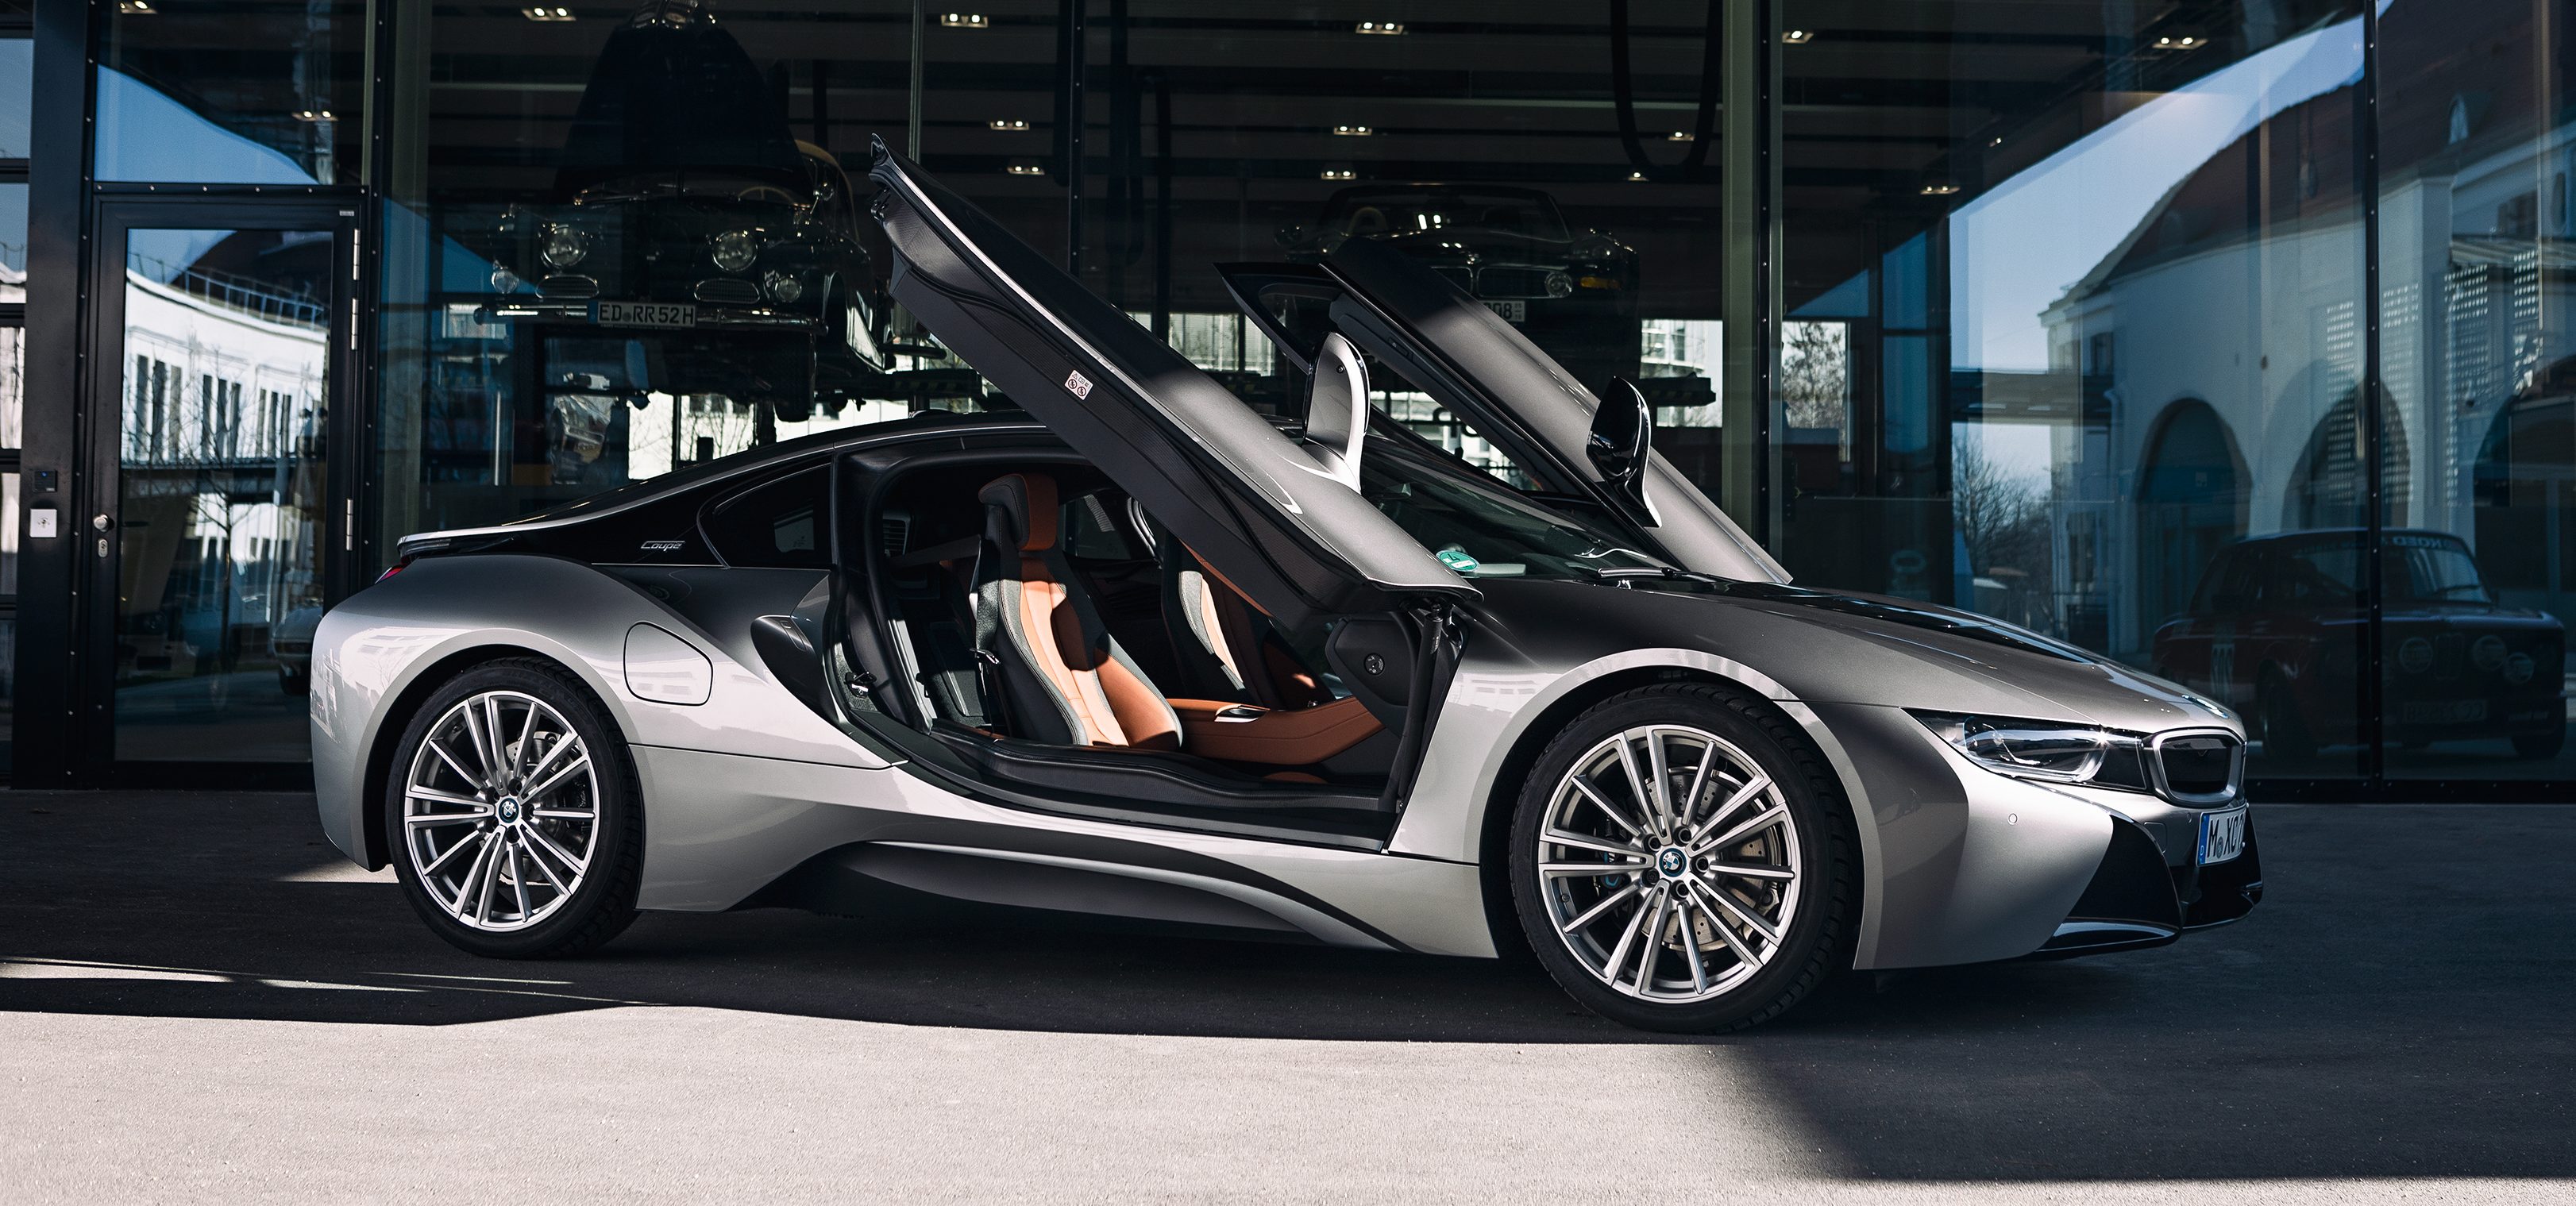 BMW ends production of the i8 electric sports car next month | Electrek